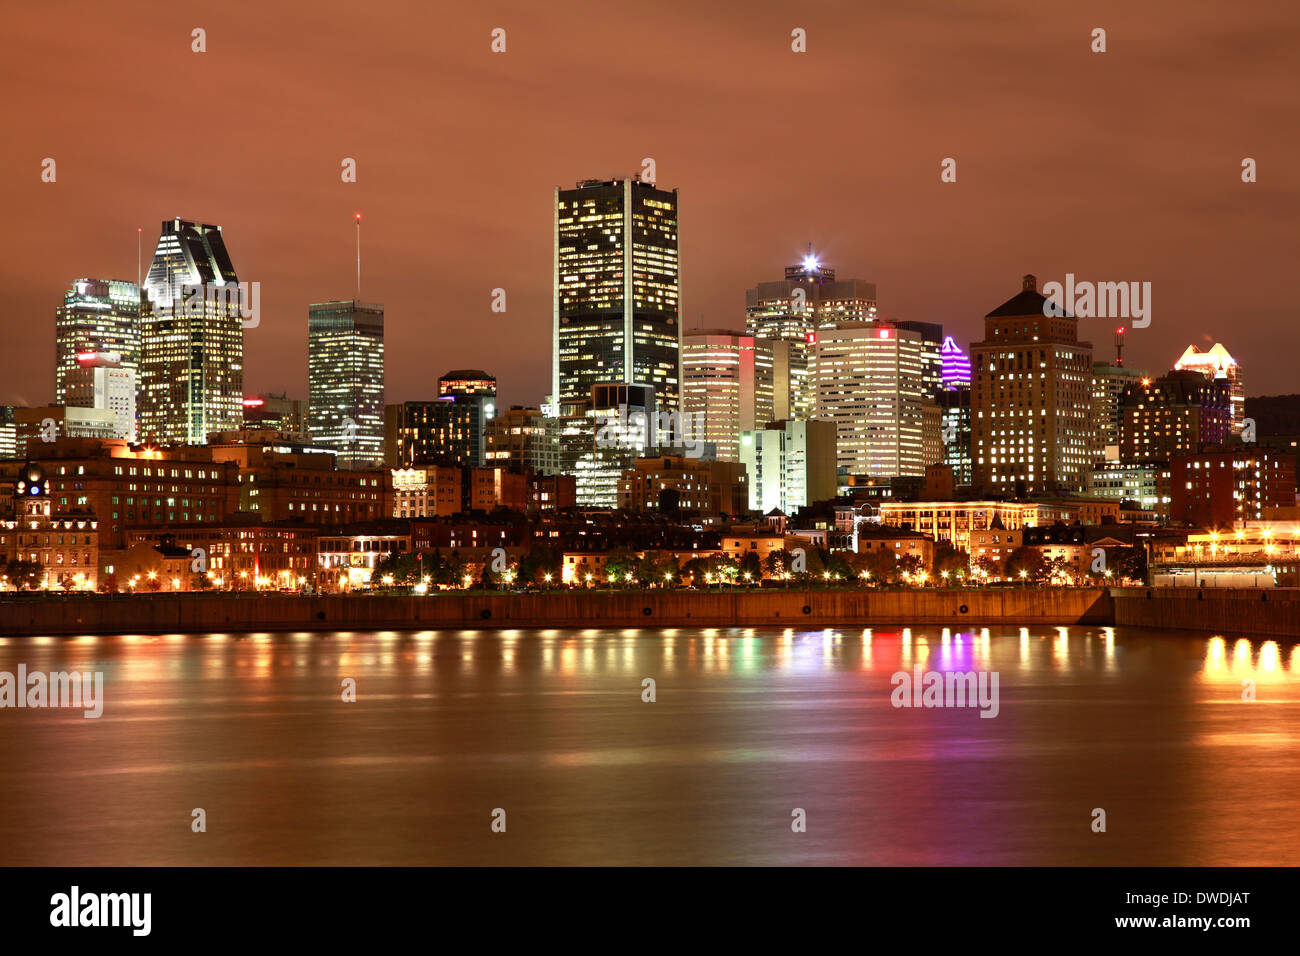 Montreal skyline at night with buildings reflections on Saint Lawrence River Stock Photo